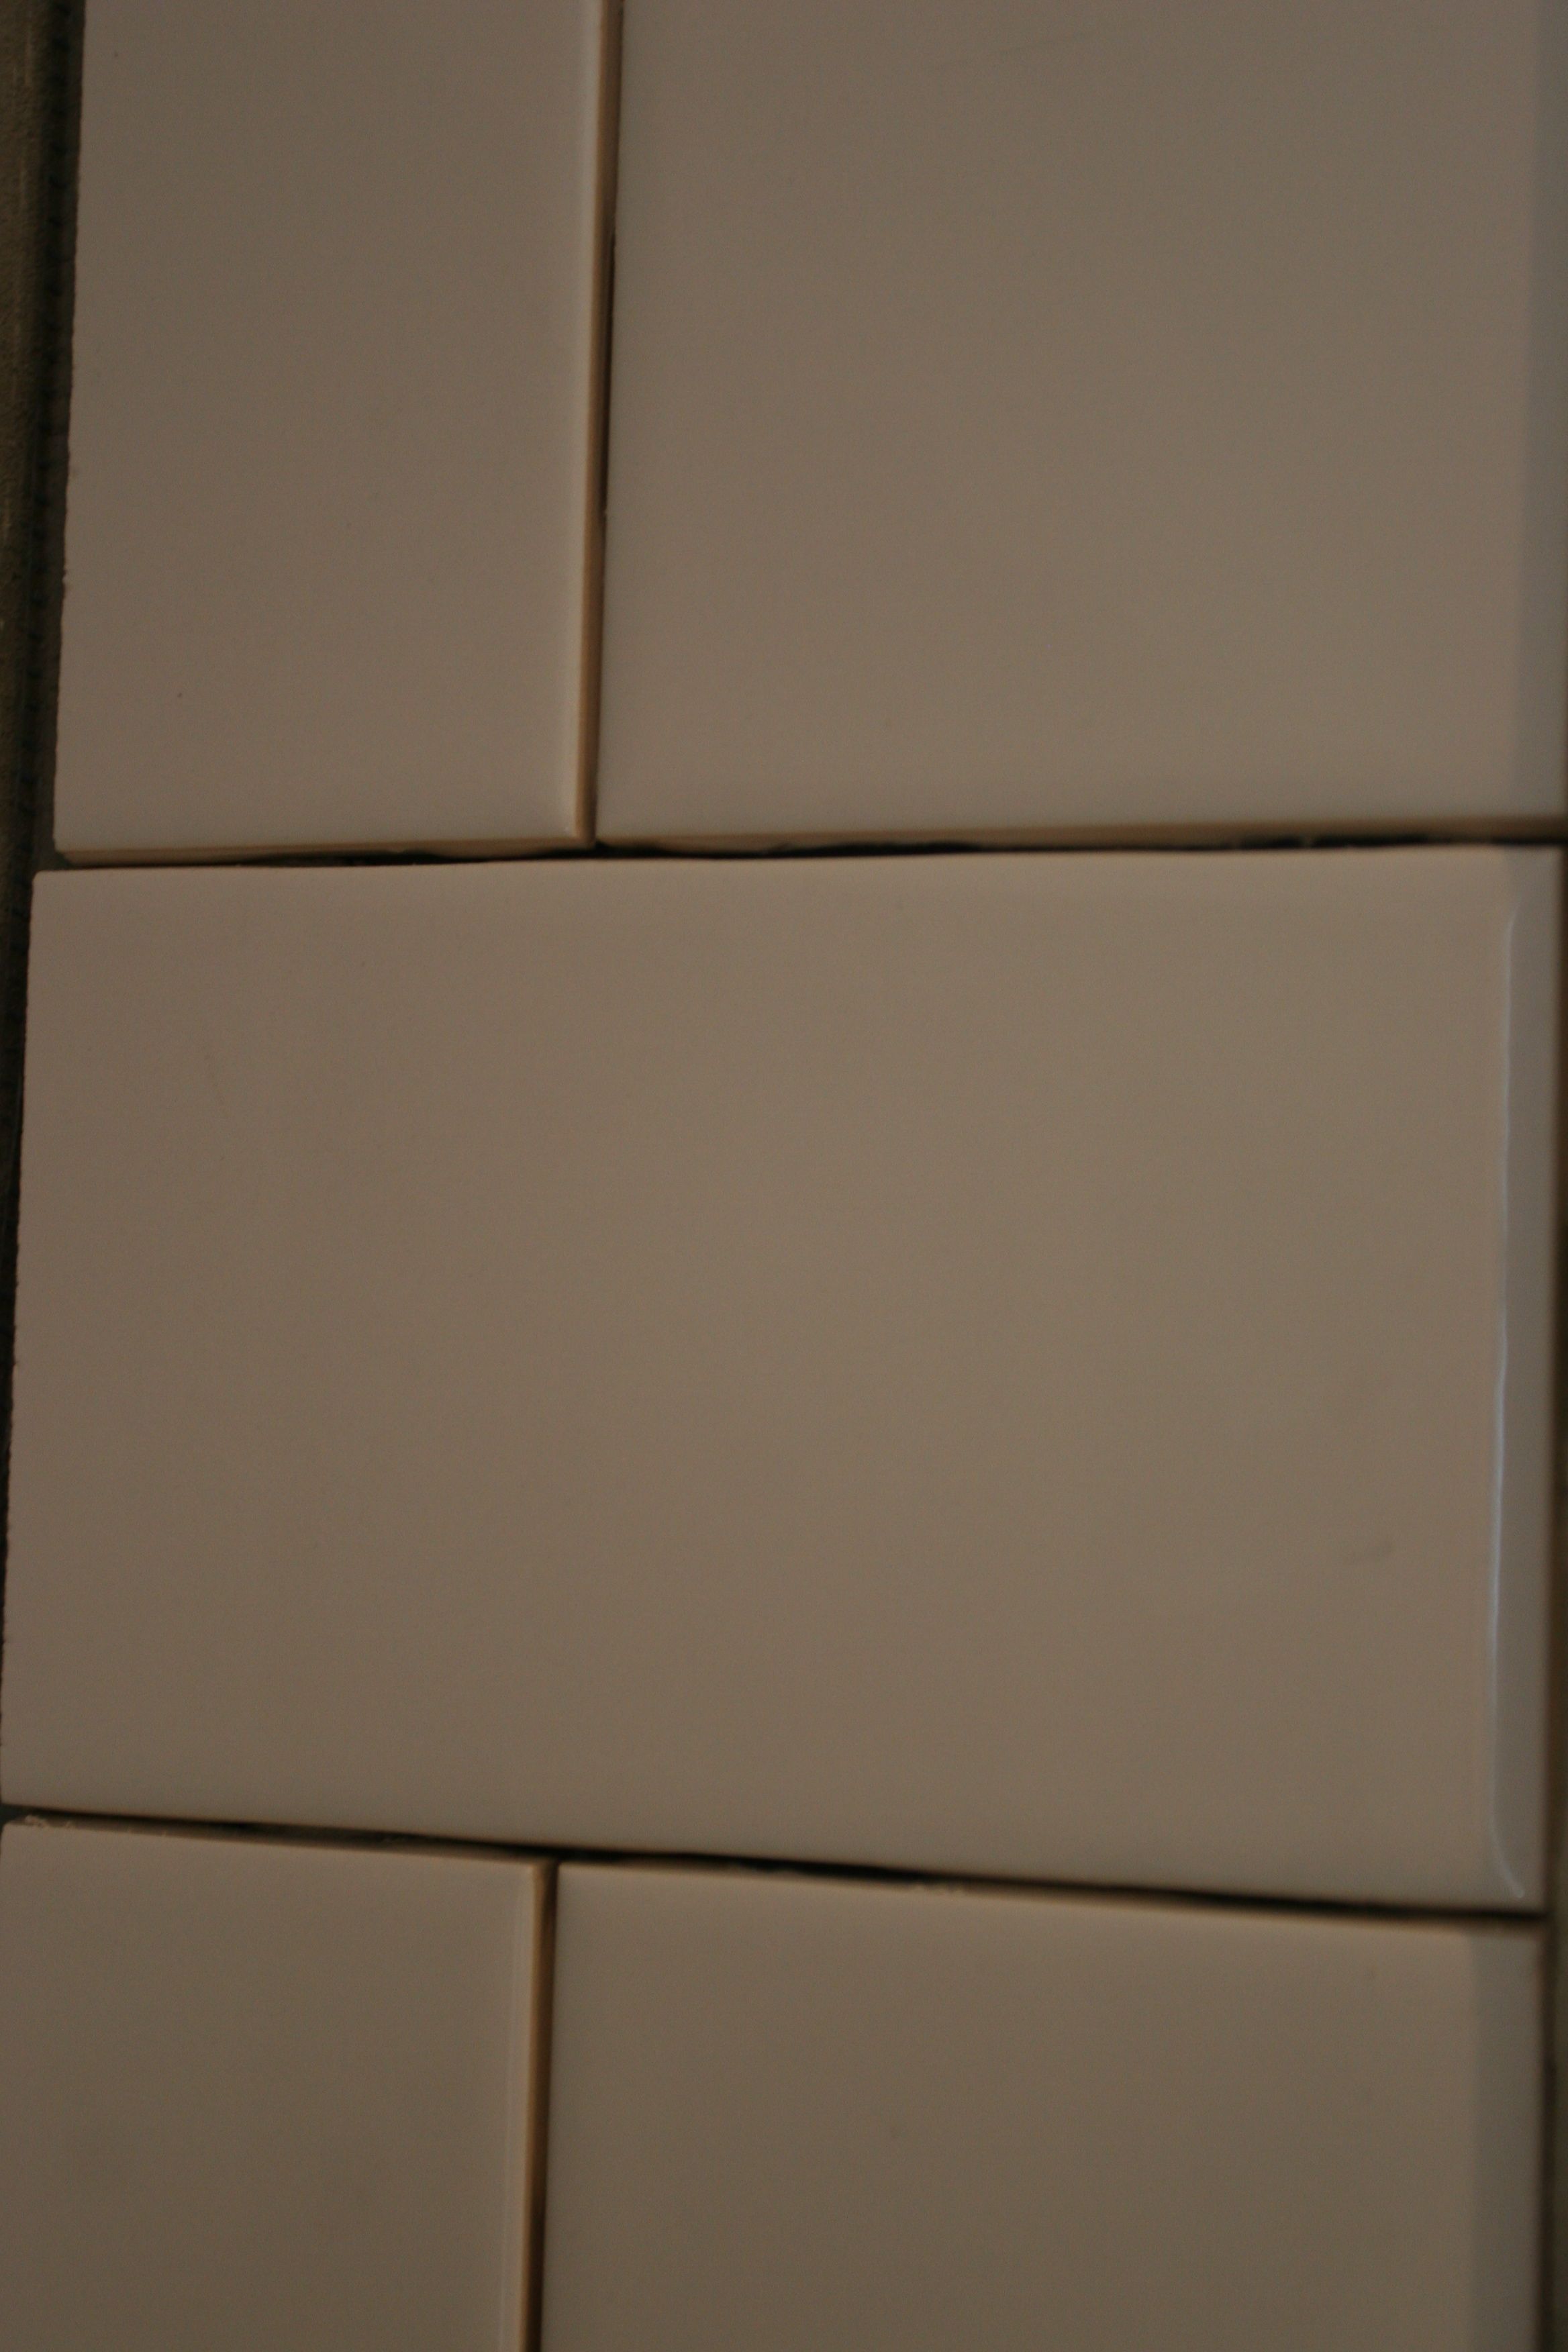 The subway tile will be a repeating theme, as it would have been in 1920.